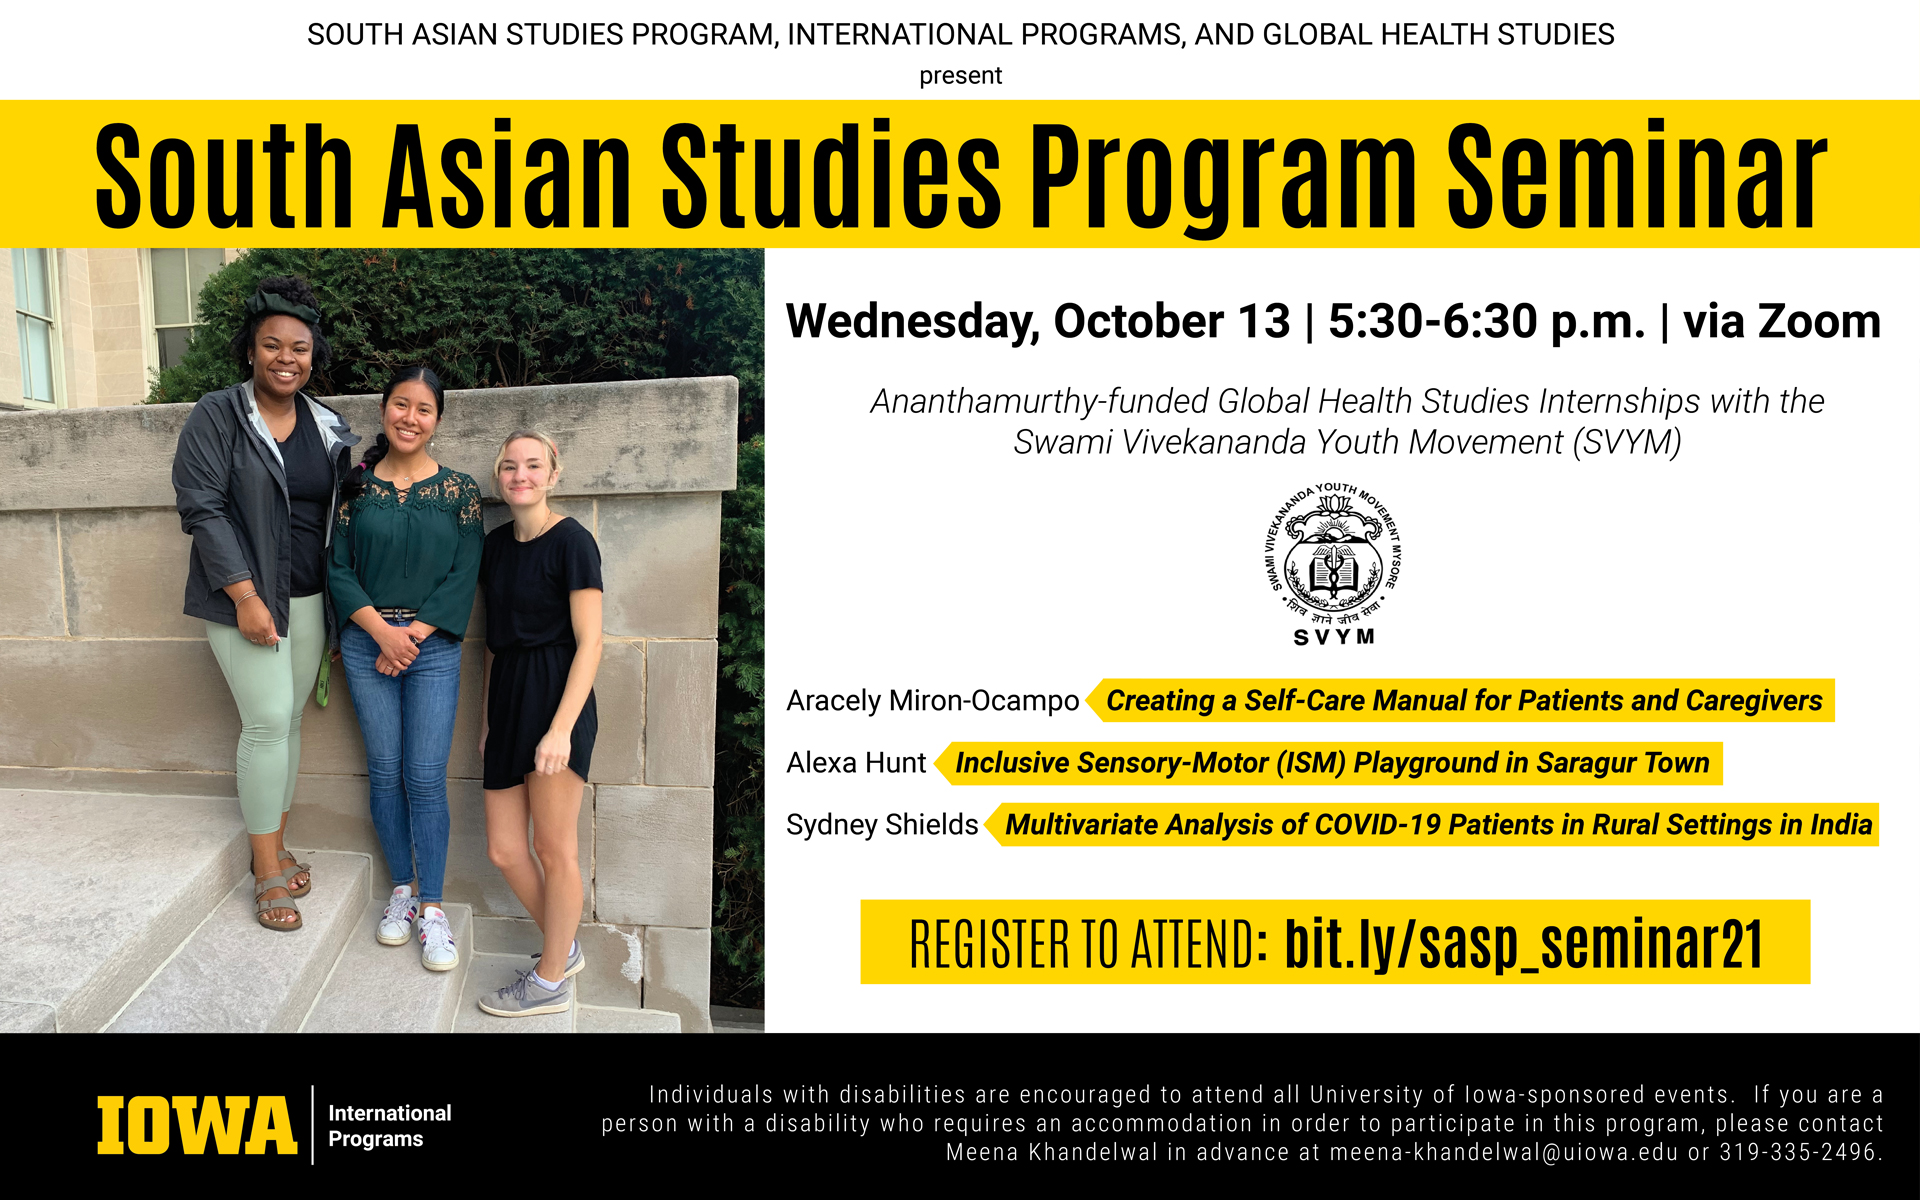 the south asian studies program, international programs, and global heath studies present the south asian studies program seminar on wednesday october 13 from 5 30 to 6 30 p m via Zoom. register to attend at bit.ly/sasp_seminar21